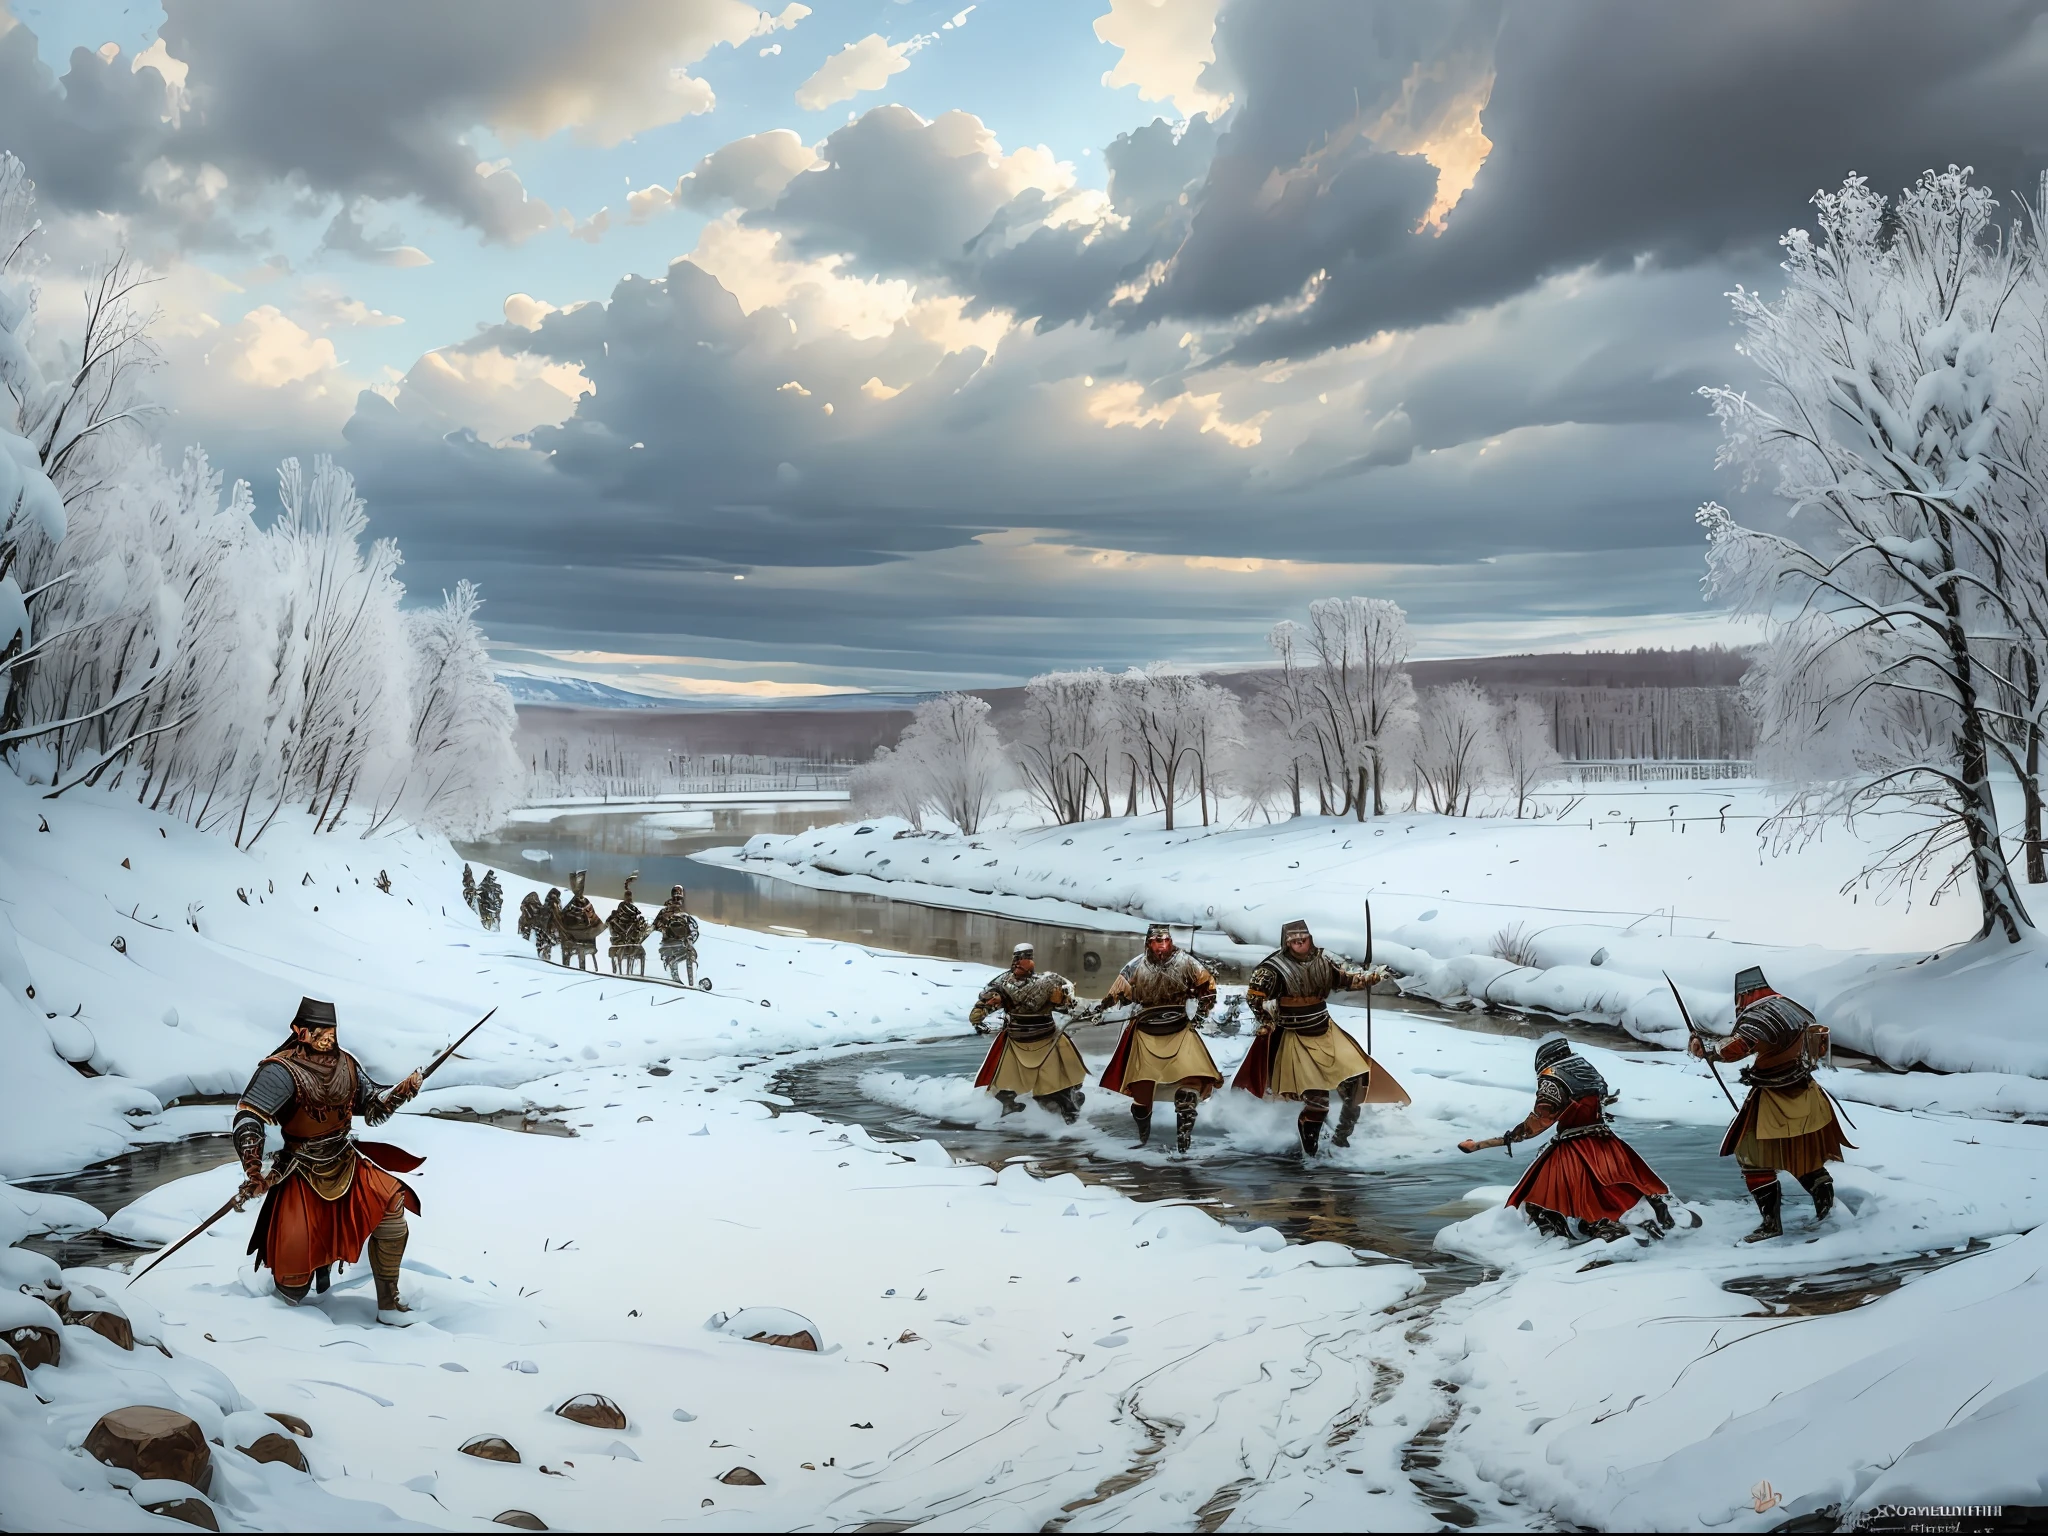 Make a oil painting of the late renaissance style depicting a battle between 2 ancient roman armies of germanic theme on a snowy riverbank --auto